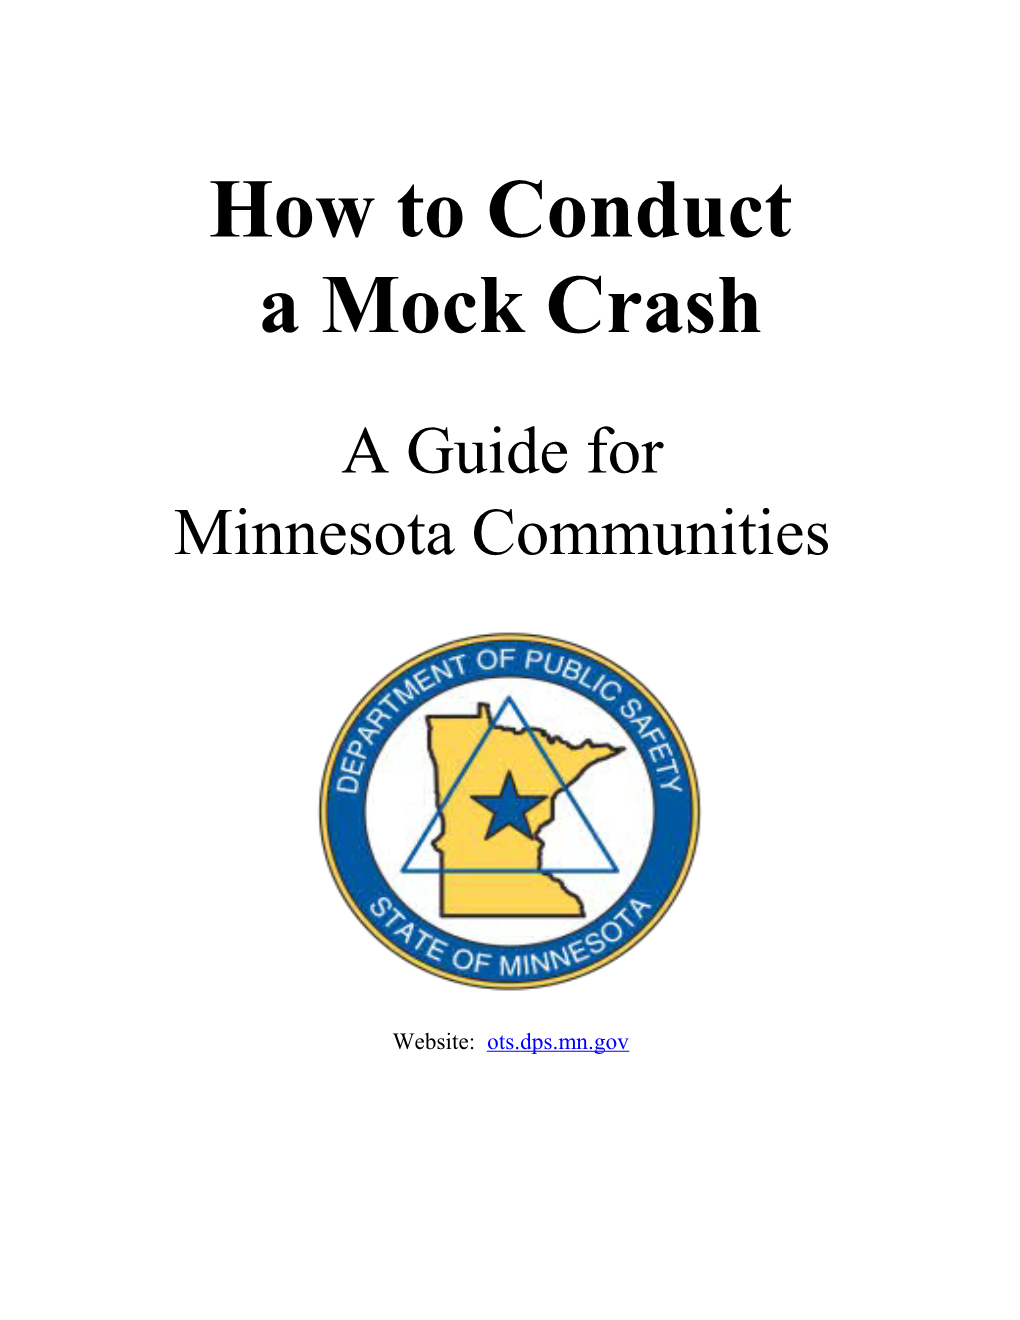 How to Conduct a Mock Crash